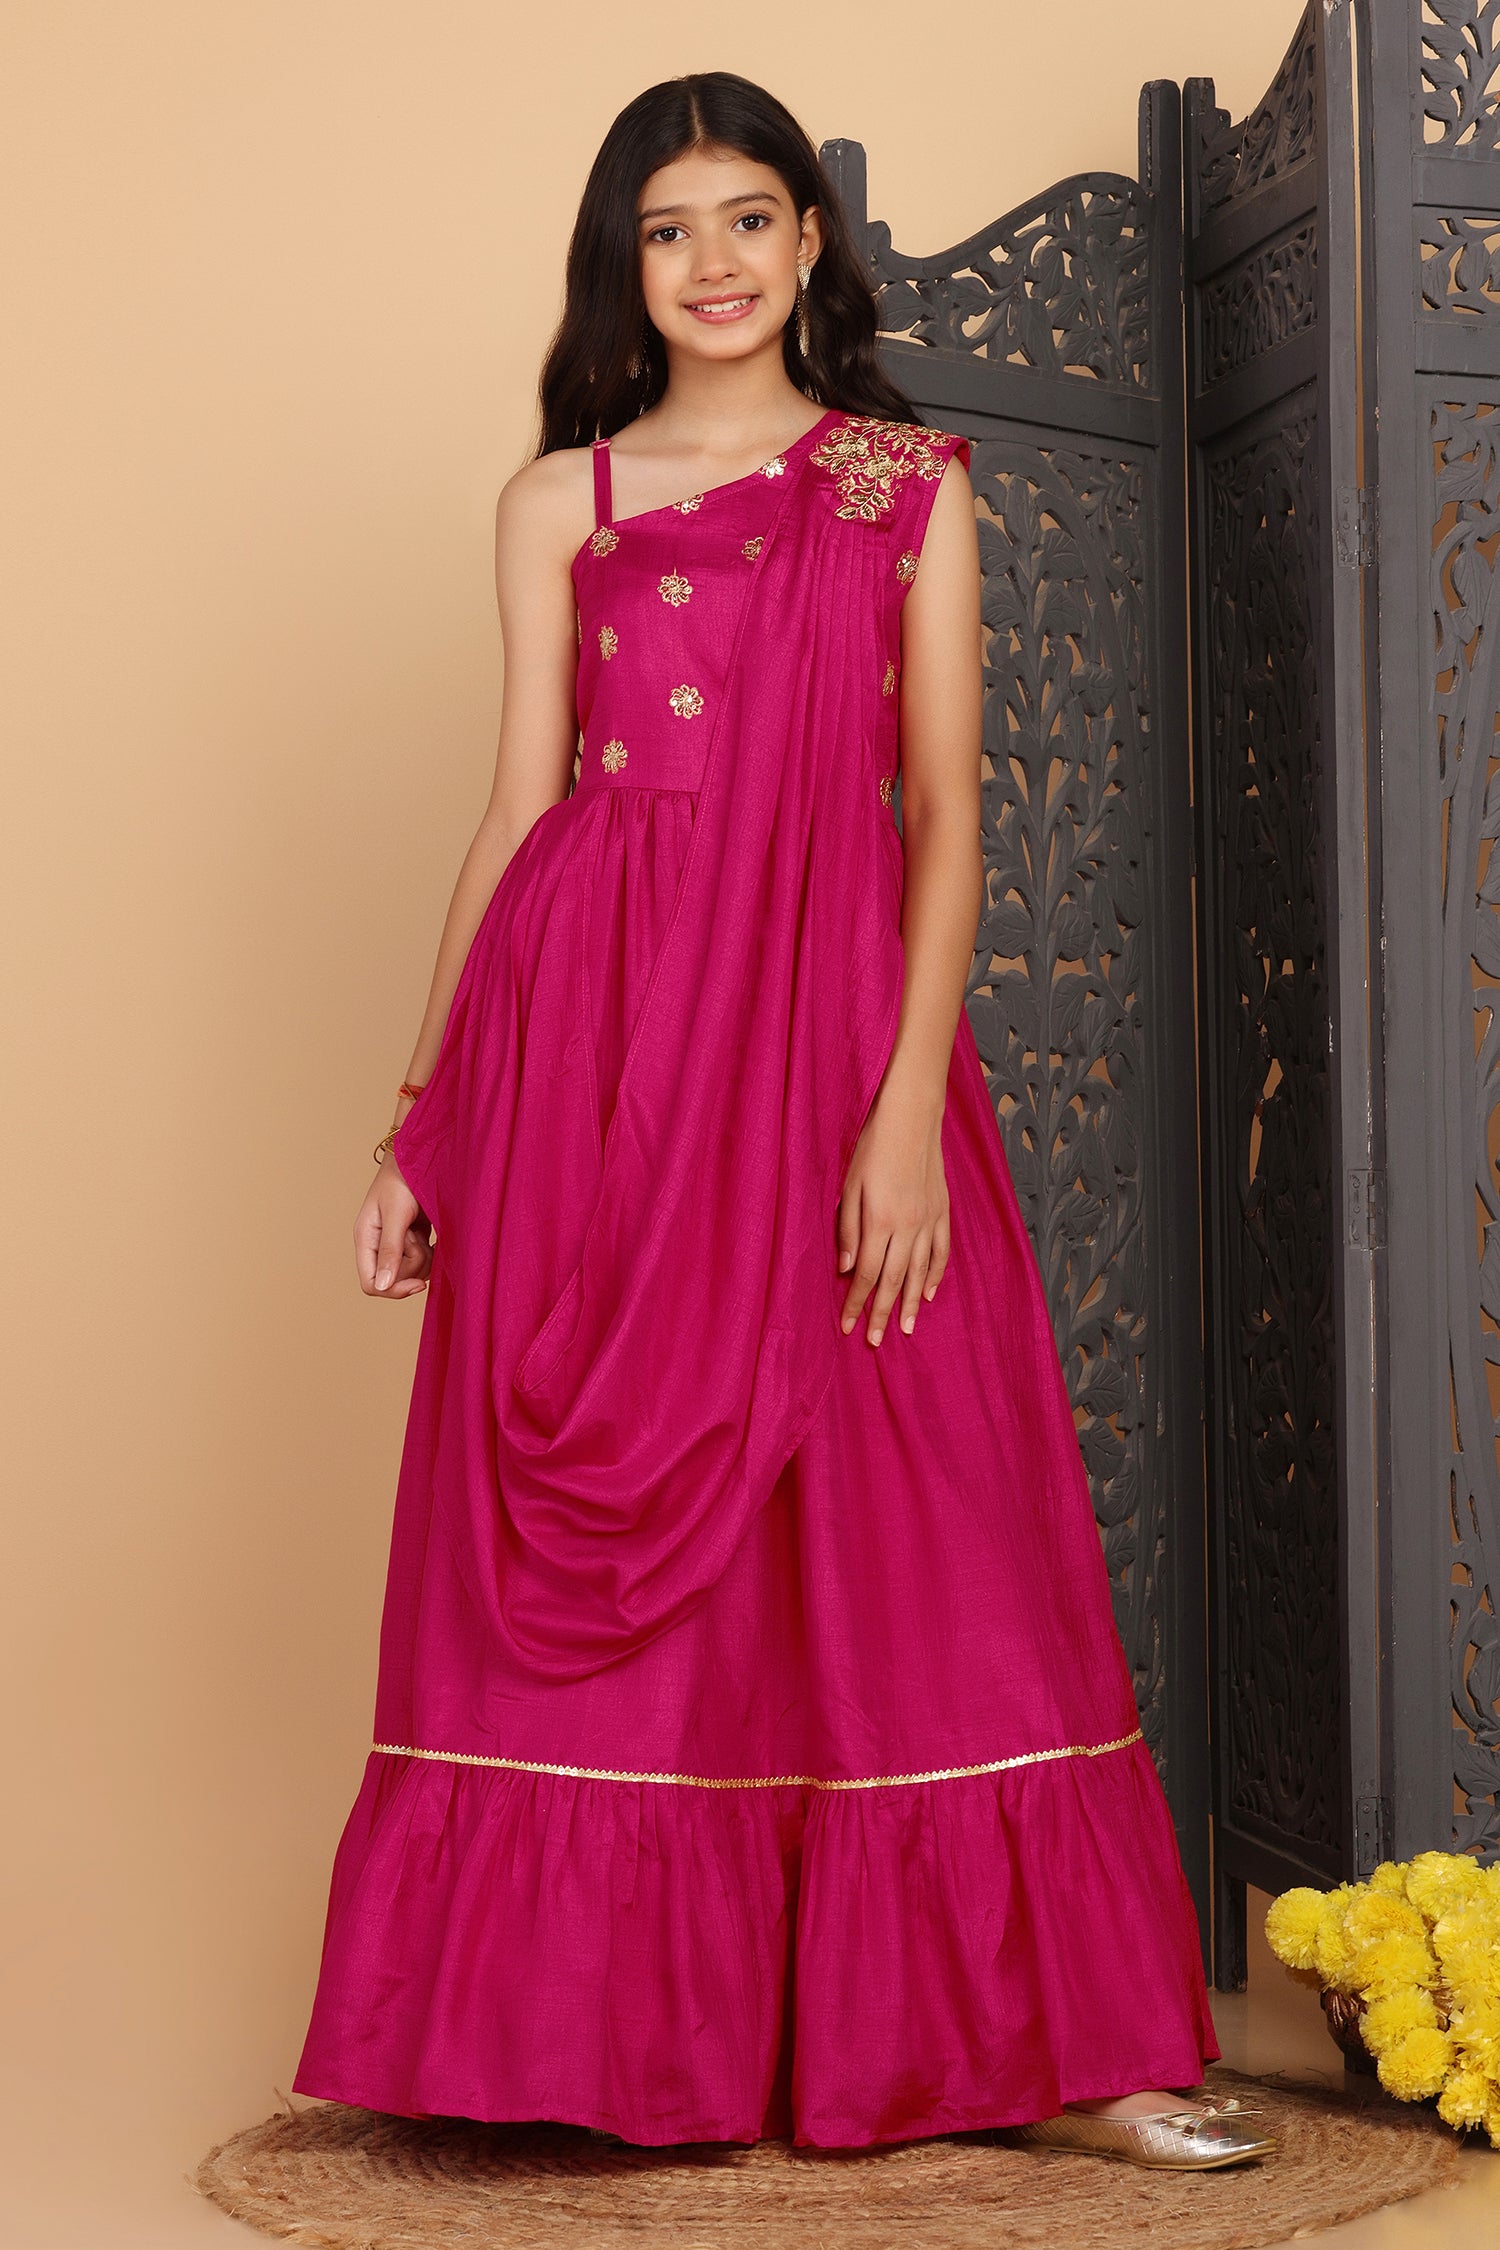 Rani colour rayon long gown at Rs 969.00 | Long Gowns | ID: 2851893596448